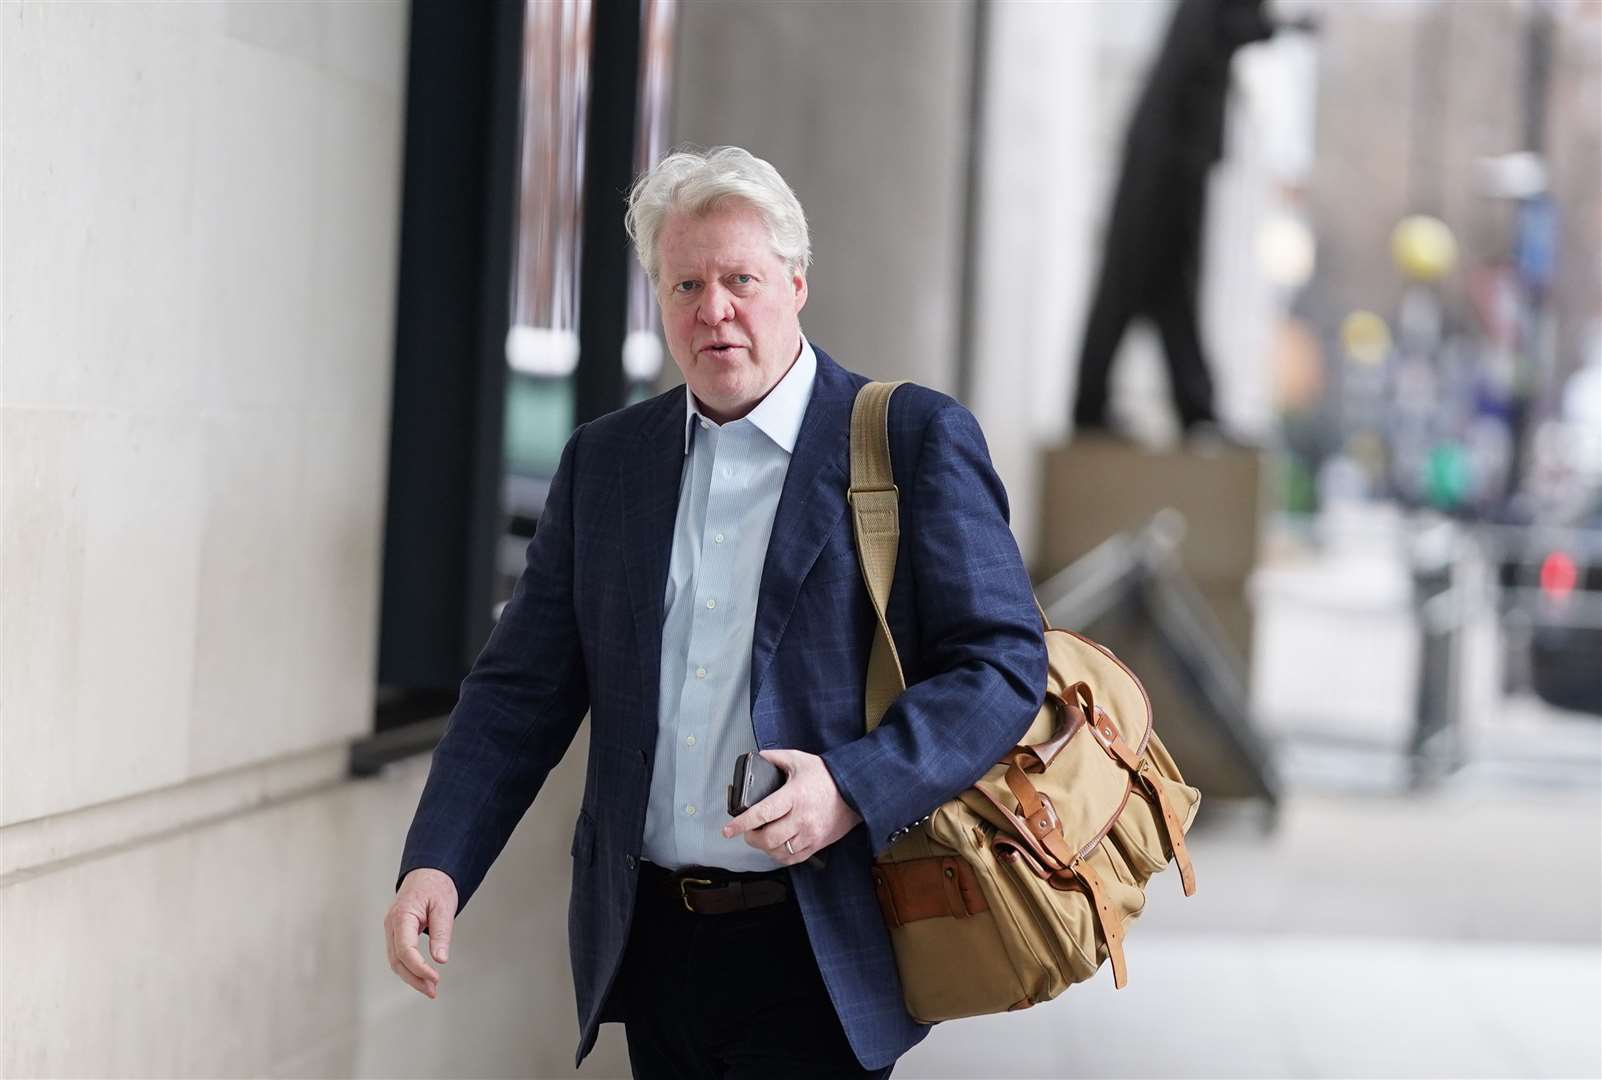 Mr Bashir was in ‘serious breach’ of BBC producer guidelines when he faked bank statements and showed them to Earl Spencer, pictured (Stefan Rousseau/PA)